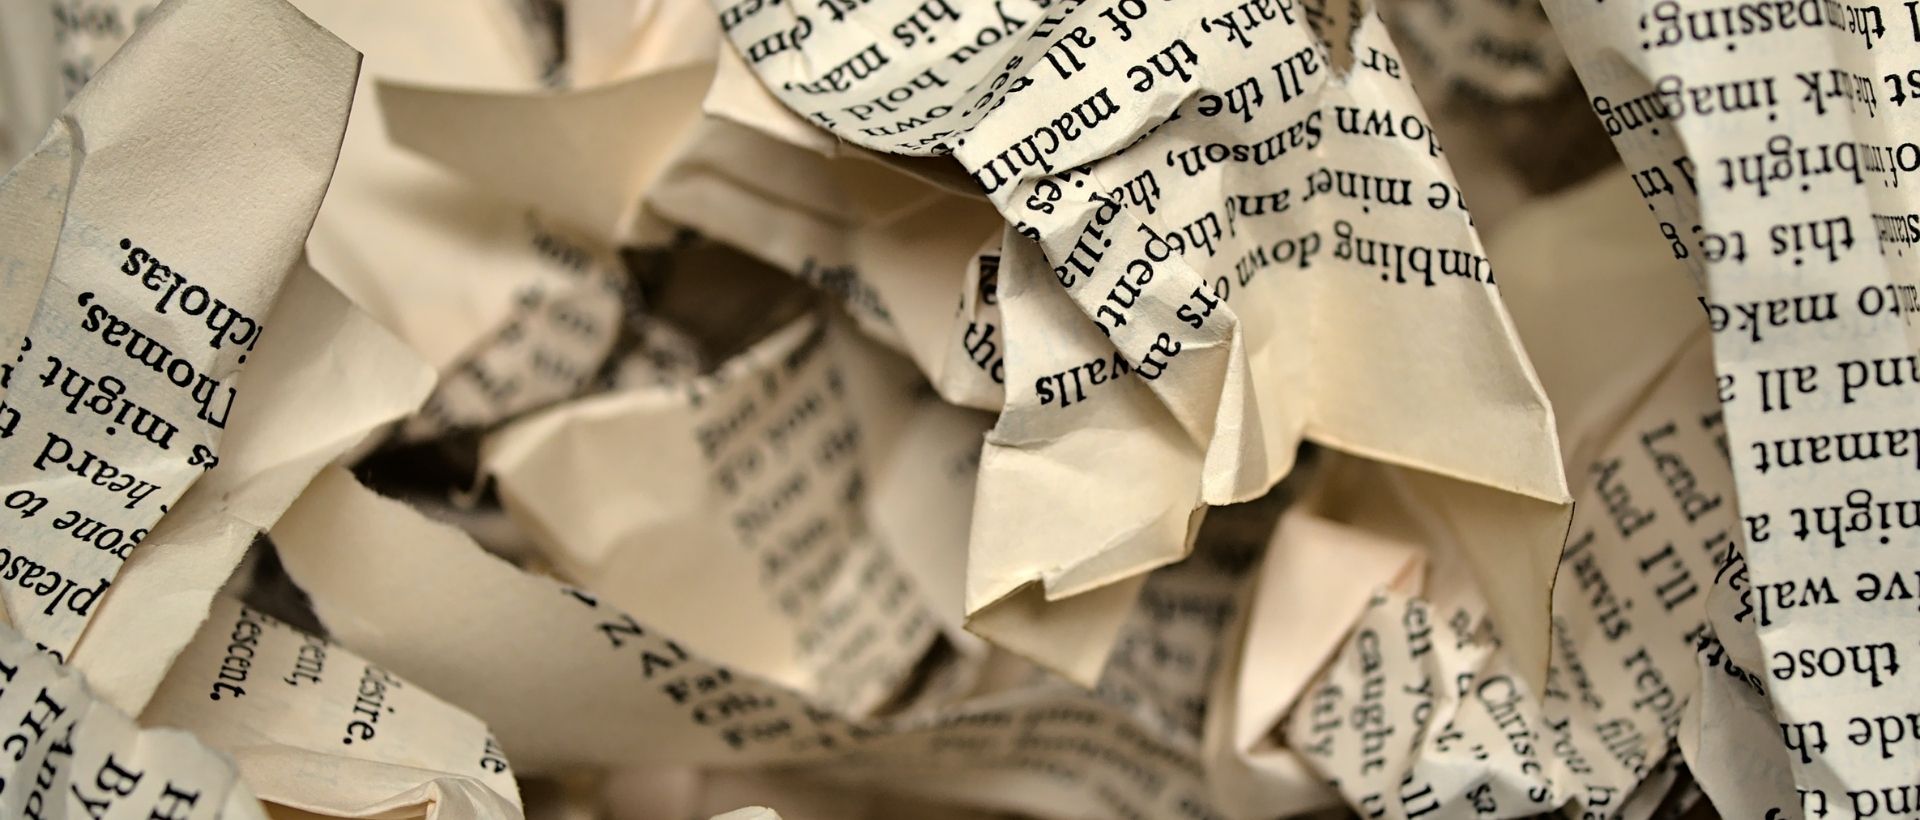 a close up of a pile of newspapers.